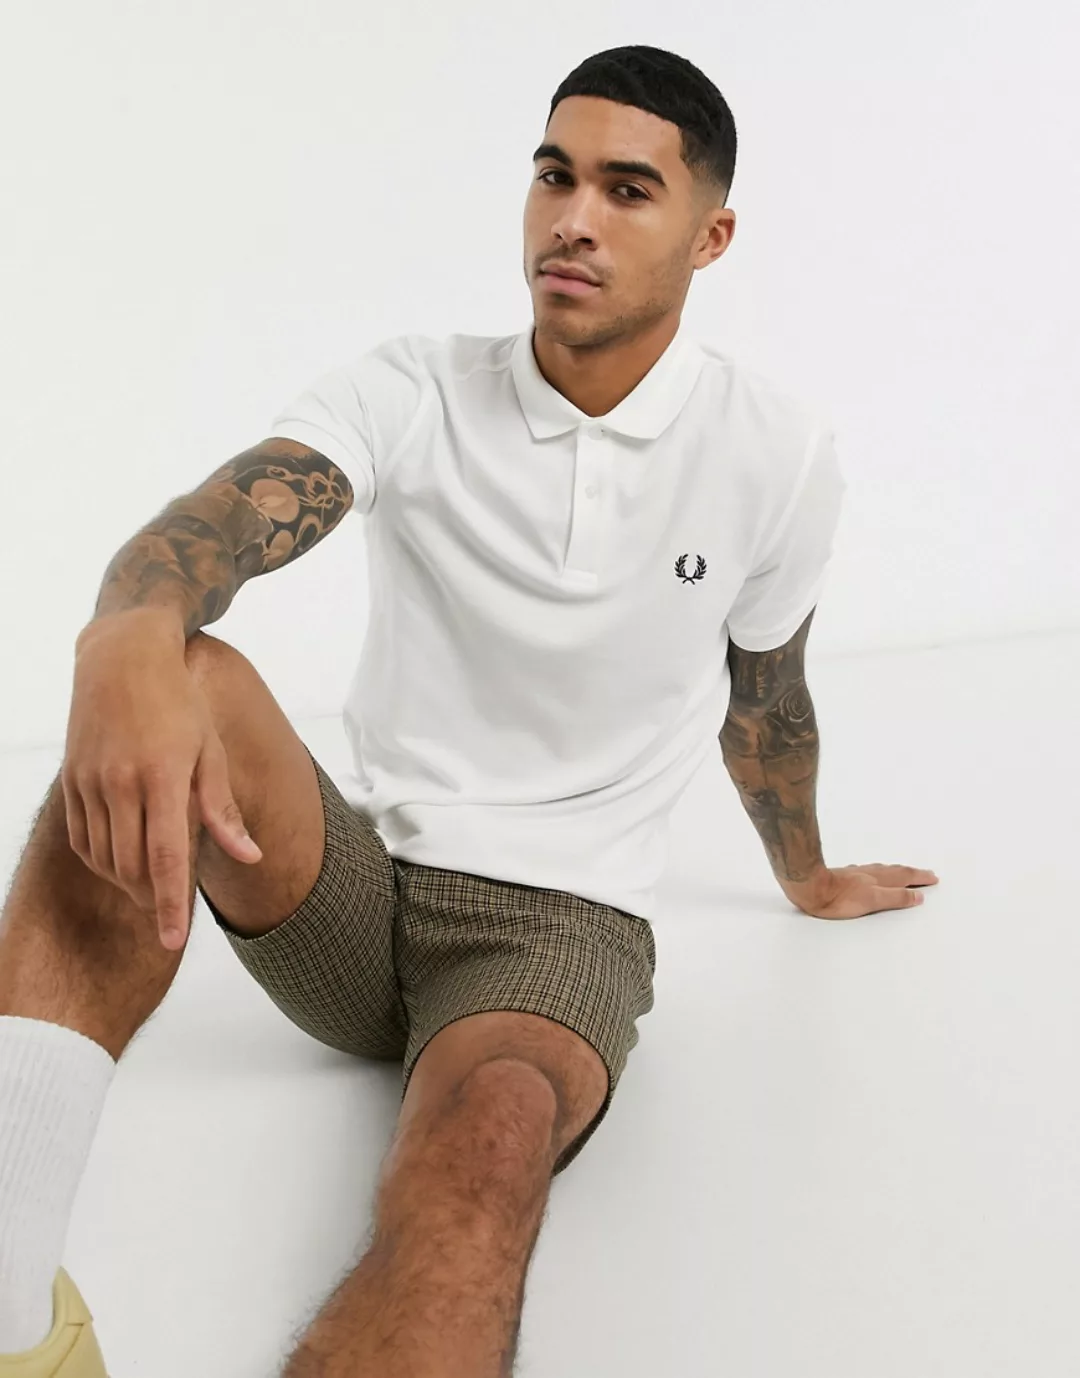 Fred Perry  Poloshirt THE FRED PERRY SHIRT günstig online kaufen